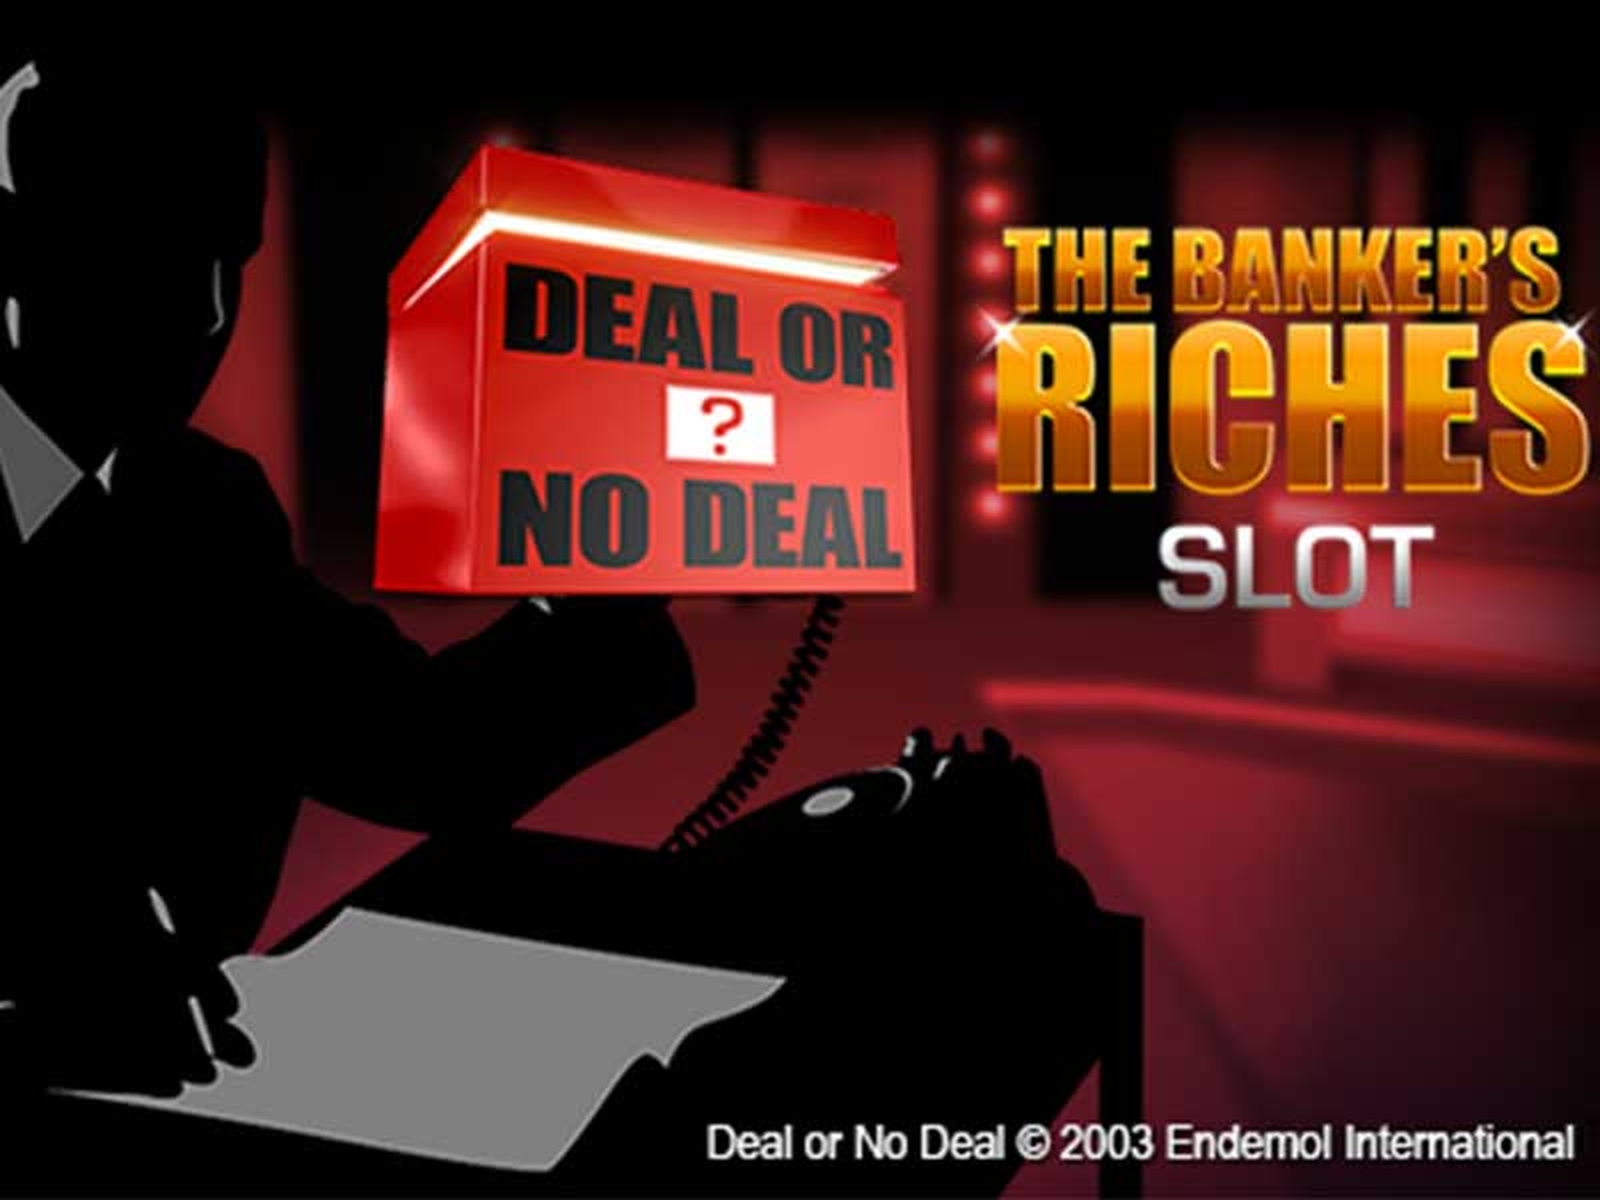 The Deal or no Deal: The Banker's Riches Online Slot Demo Game by Playtech